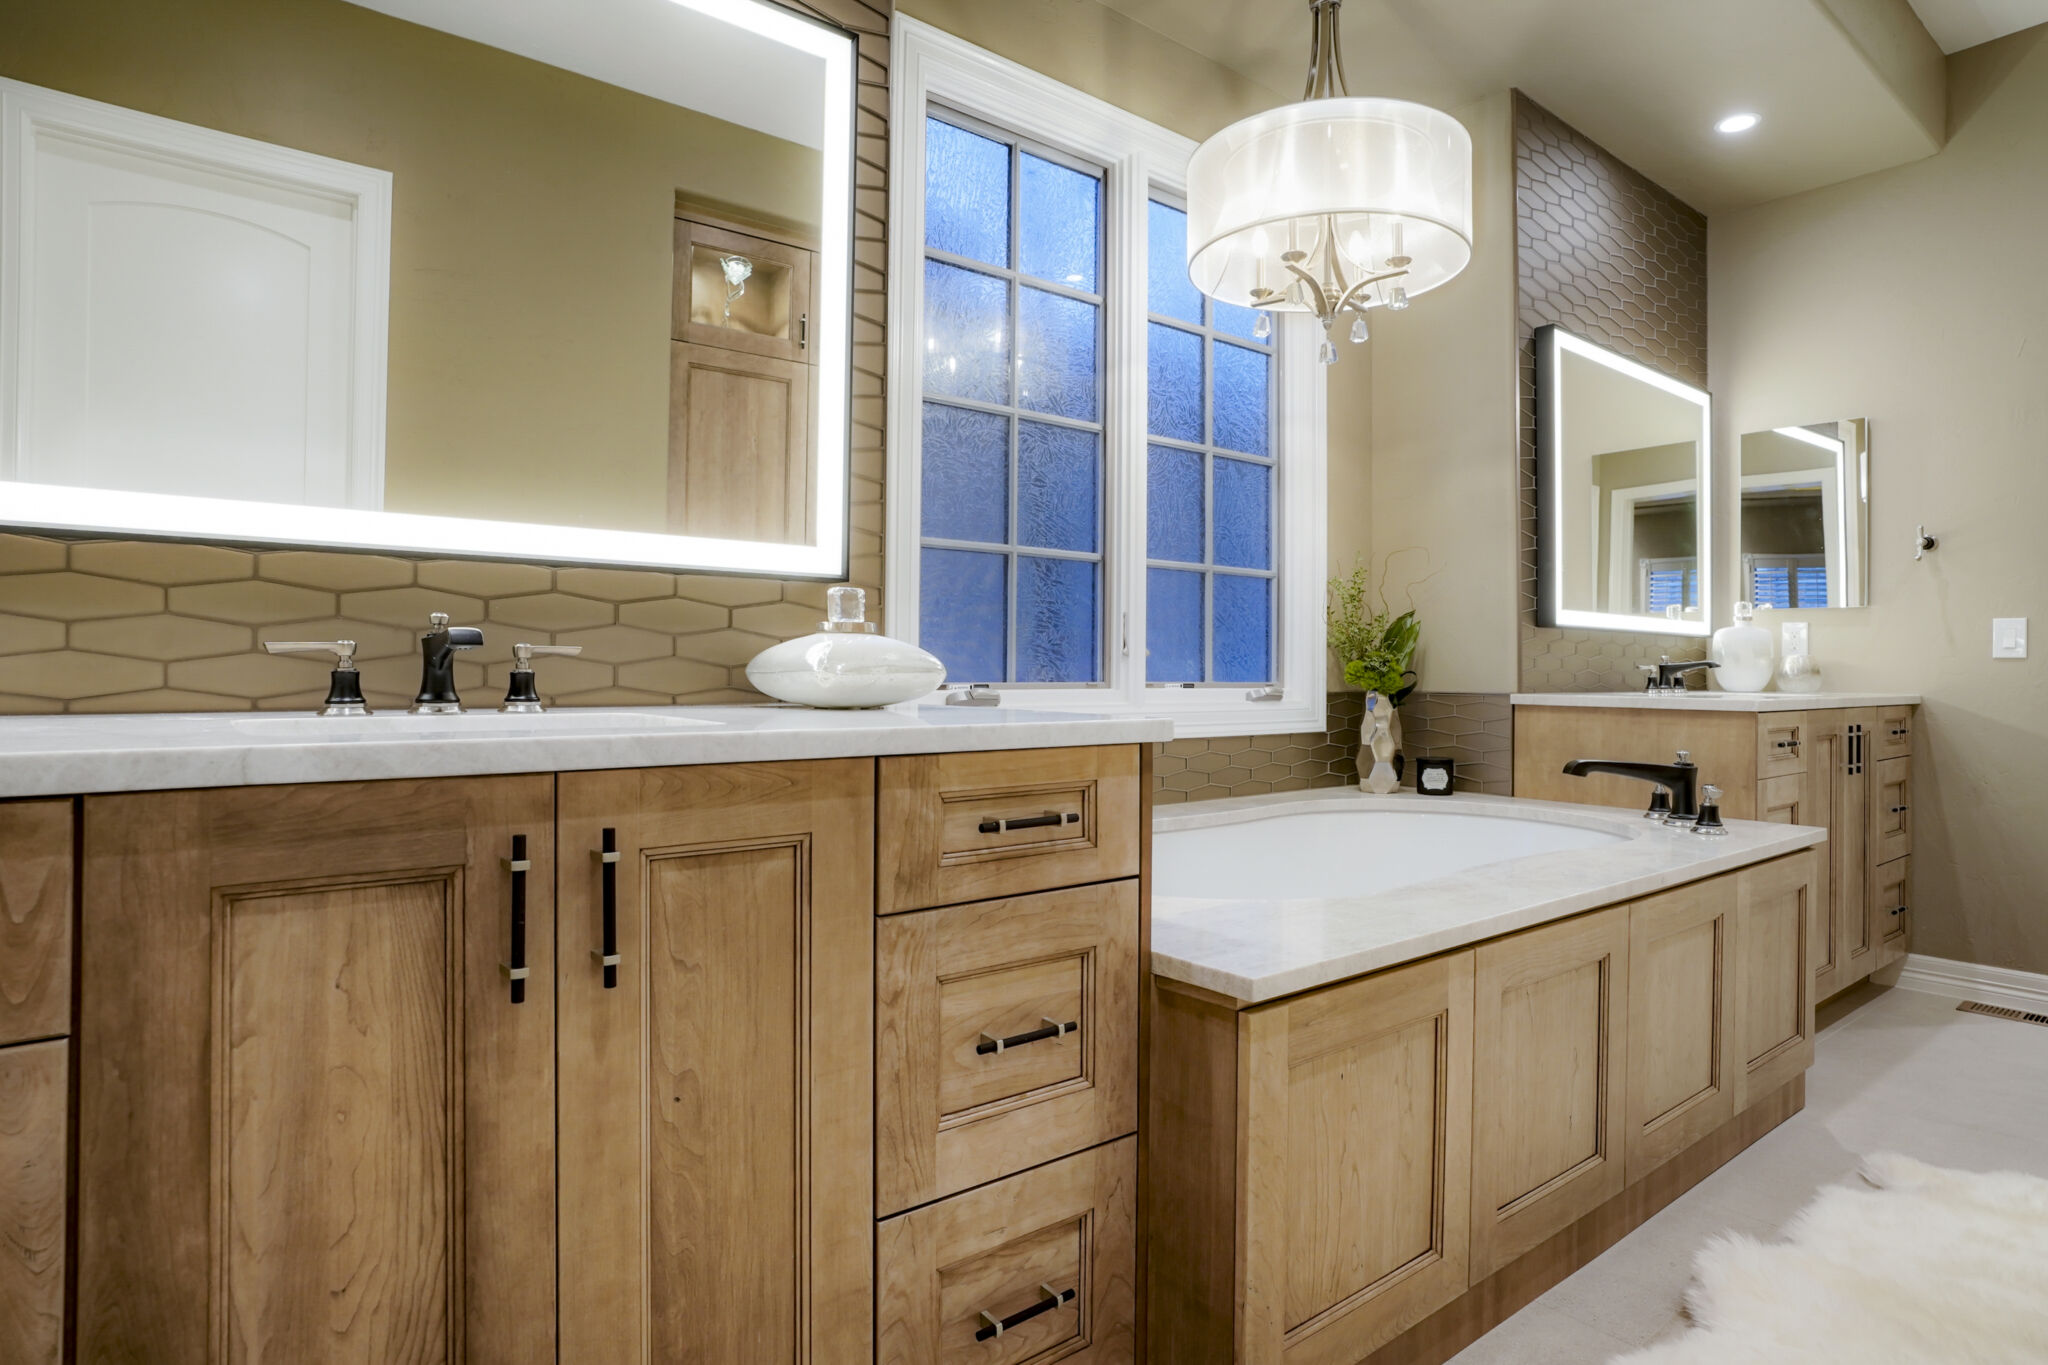 Master bath remodel featuring cherry cabinets